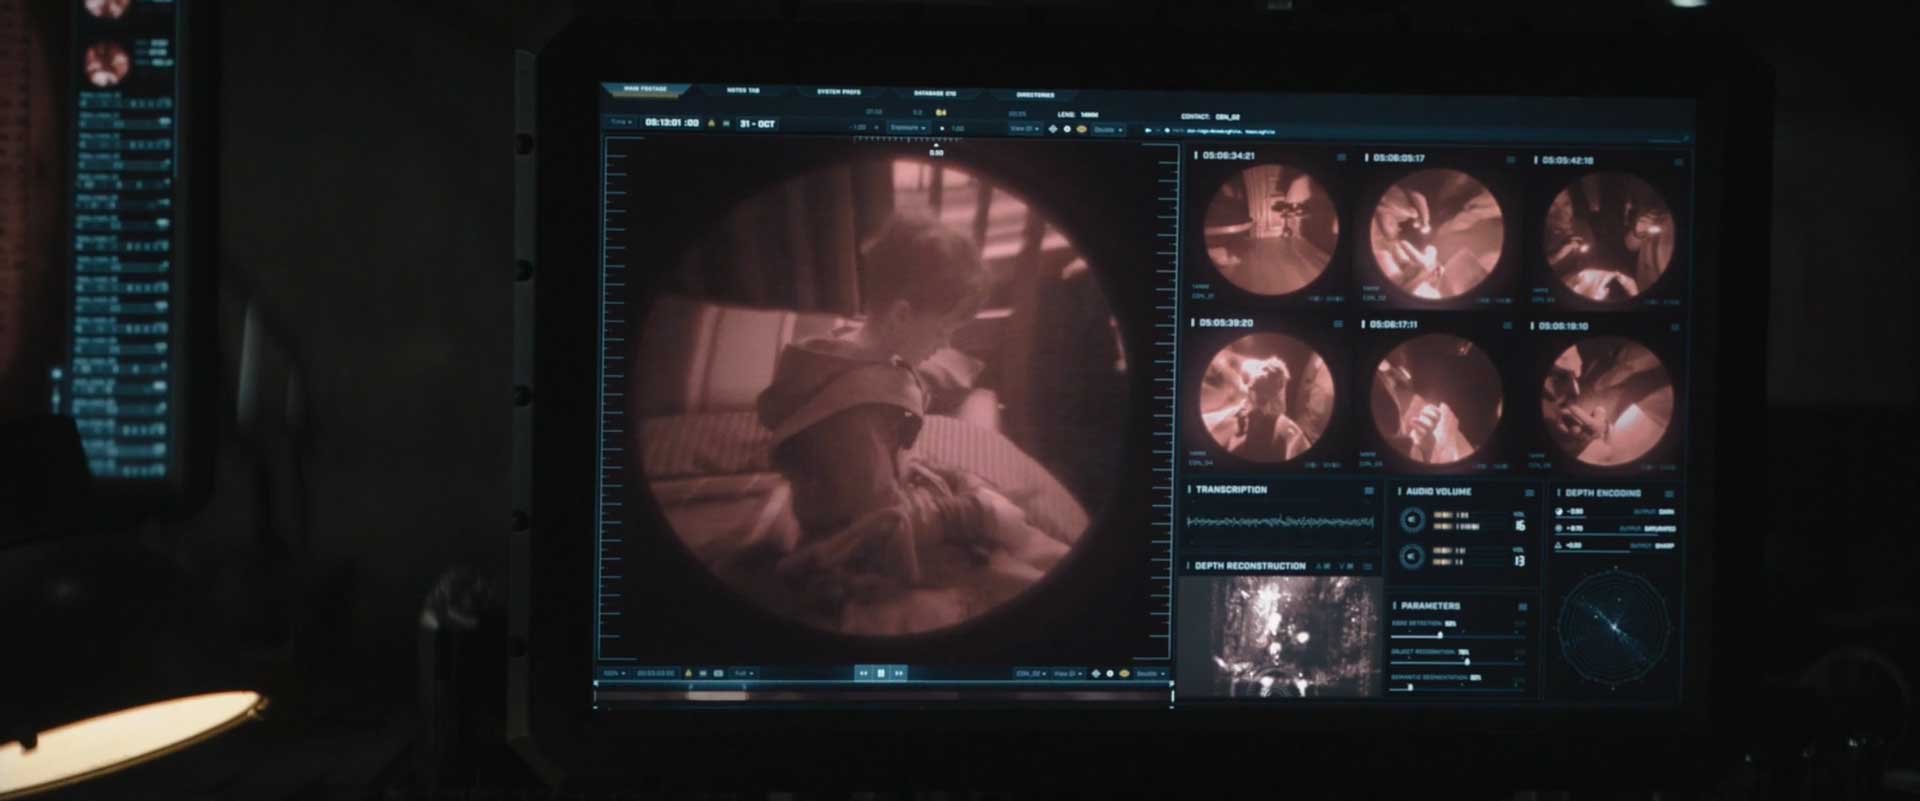 The image of a child on the screen inside the Batcave in The Batman Matt Reeves movie